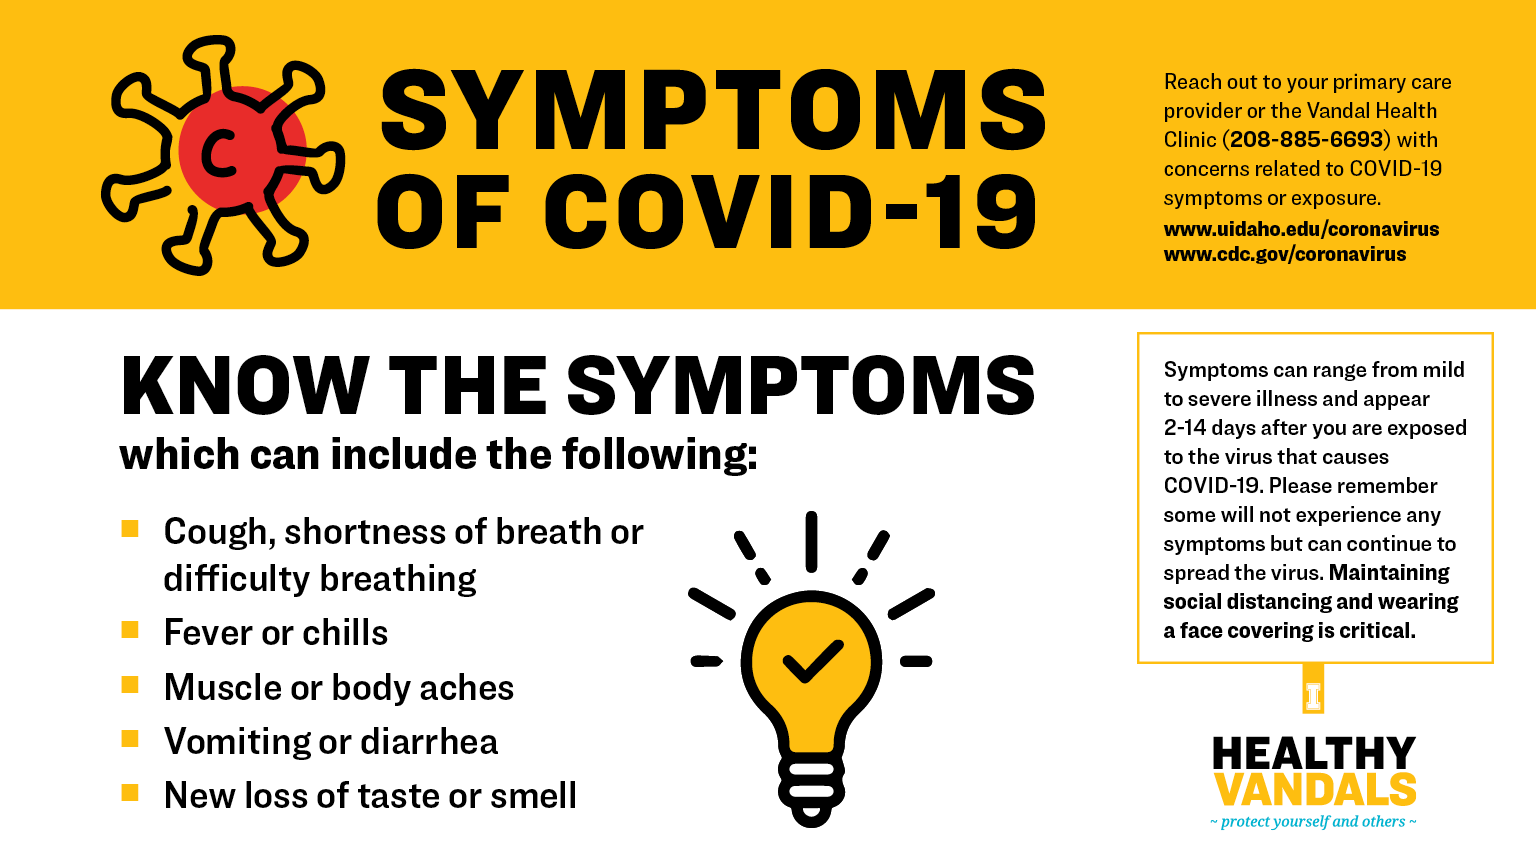 Know the symptoms of COVID-19, which can include the following: Cough, shortness of breath or difficulty breathing; Fever or chills; Muscle or body aches; Vomiting or diarrhea; New loss of taste or smell. Seek medical care immediately if someone has emergency warning signs of COVID-19: Trouble breathing; Persistent pain or pressure in the chest; New confusion; Inability to wake or stay awake; Bluish lips or face. Reach out to your primary care provider or the Vandal Health Clinic (208-885-6693) with concerns related to COVID-19 symptoms or exposure. www.uidaho.edu/coronavirus and www.cdc.gov/coronavirus. Symptoms can range from mild to severe illness and appear 2-14 days after you are exposed to the virus that causes COVID-19. Please remember some will not experience any symptoms but can continue to spread the virus. Maintaining social distancing and wearing a face covering is critical.